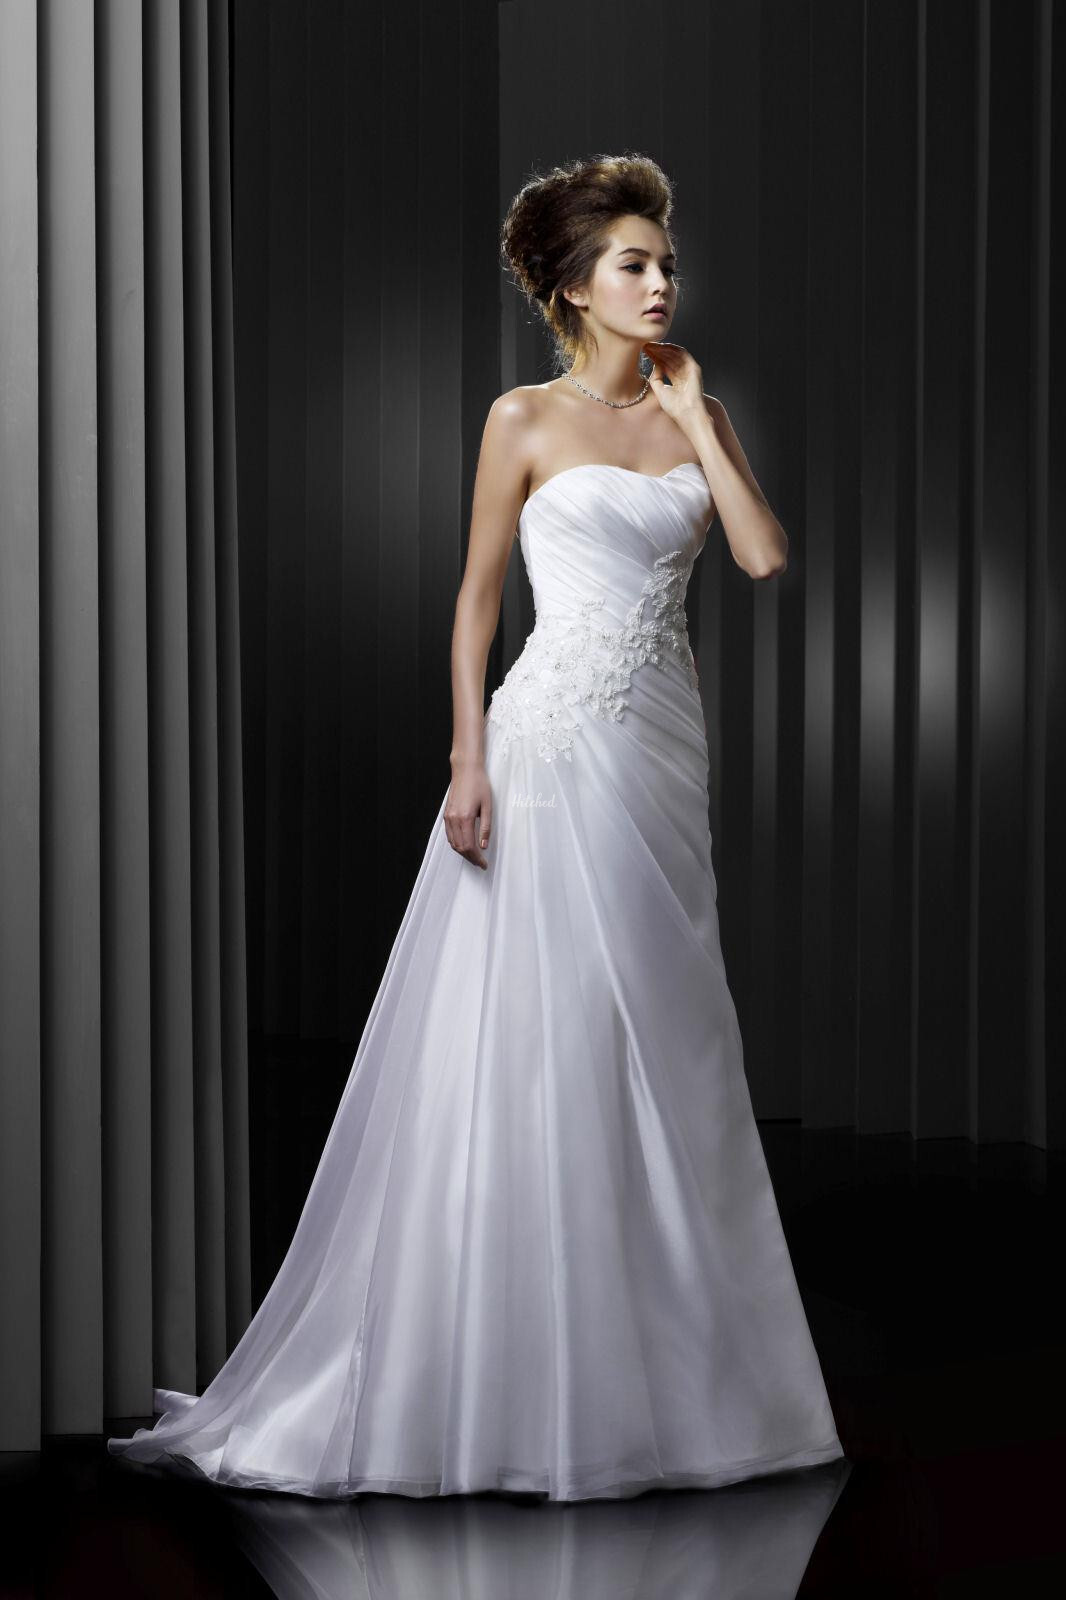 BT13-5 2 Wedding Dress from Etoile - hitched.co.uk